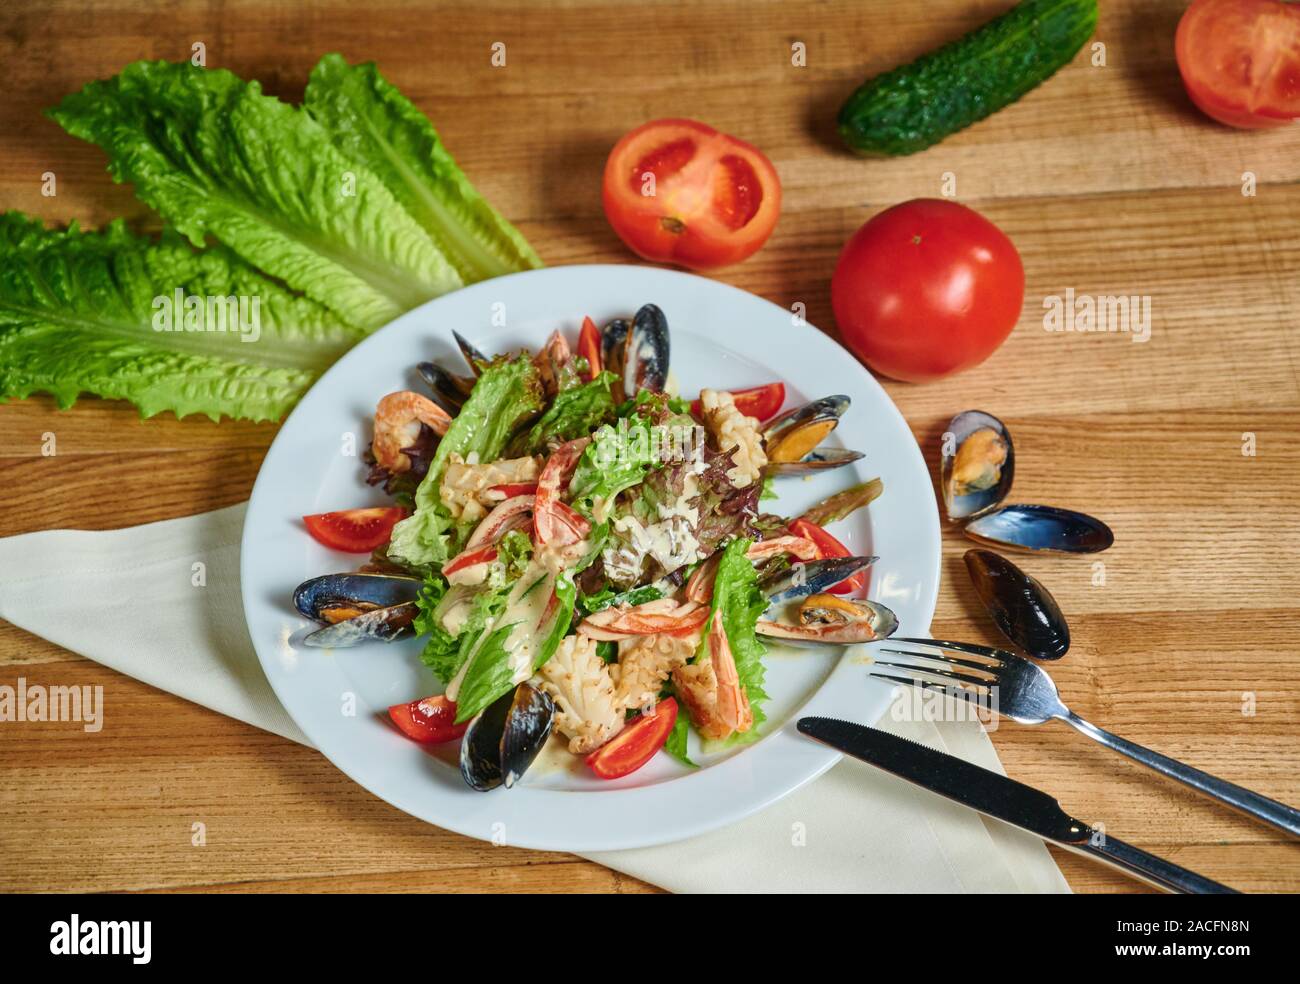 Healthy salad with shrimp, mussels, tomatoes and lettuce leaf, close-up Stock Photo